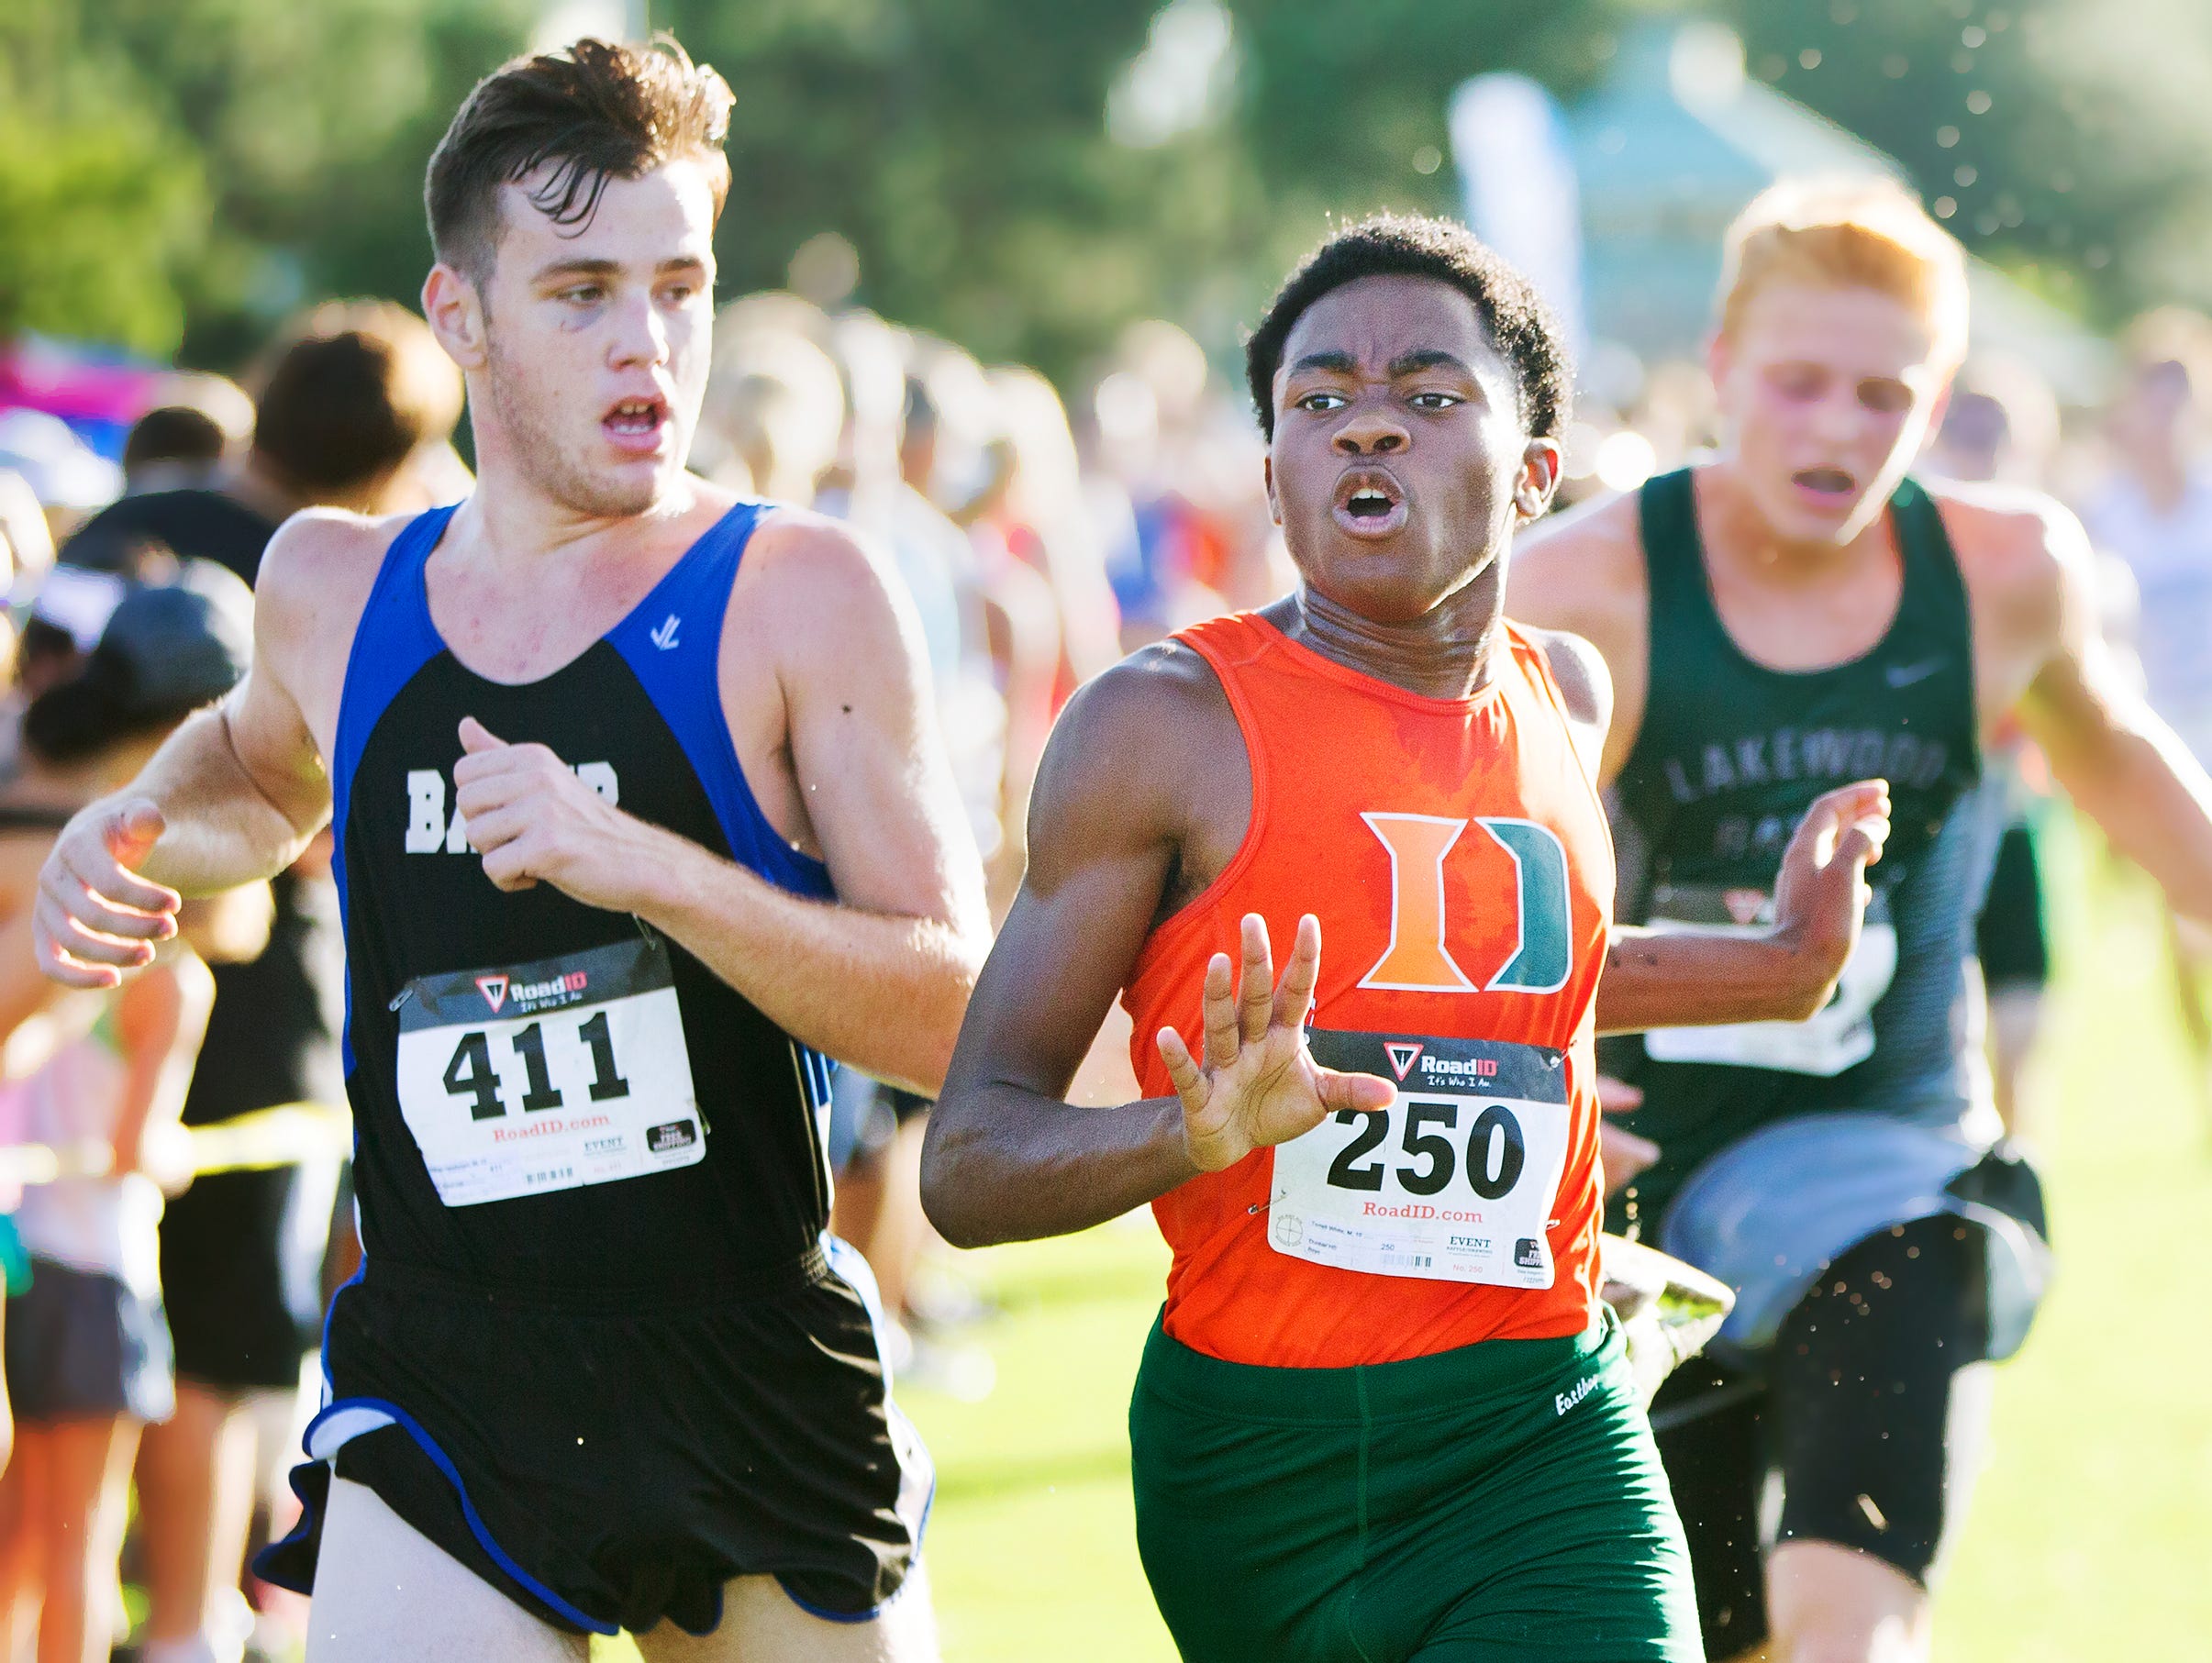 Dunbar High School's Trevor McDaniels, center, races to the finish line in the Estero DDD Invitational at Estero Community Park on Saturday. Thirty-seven high school teams from throughout South Florida competed in the annual event.